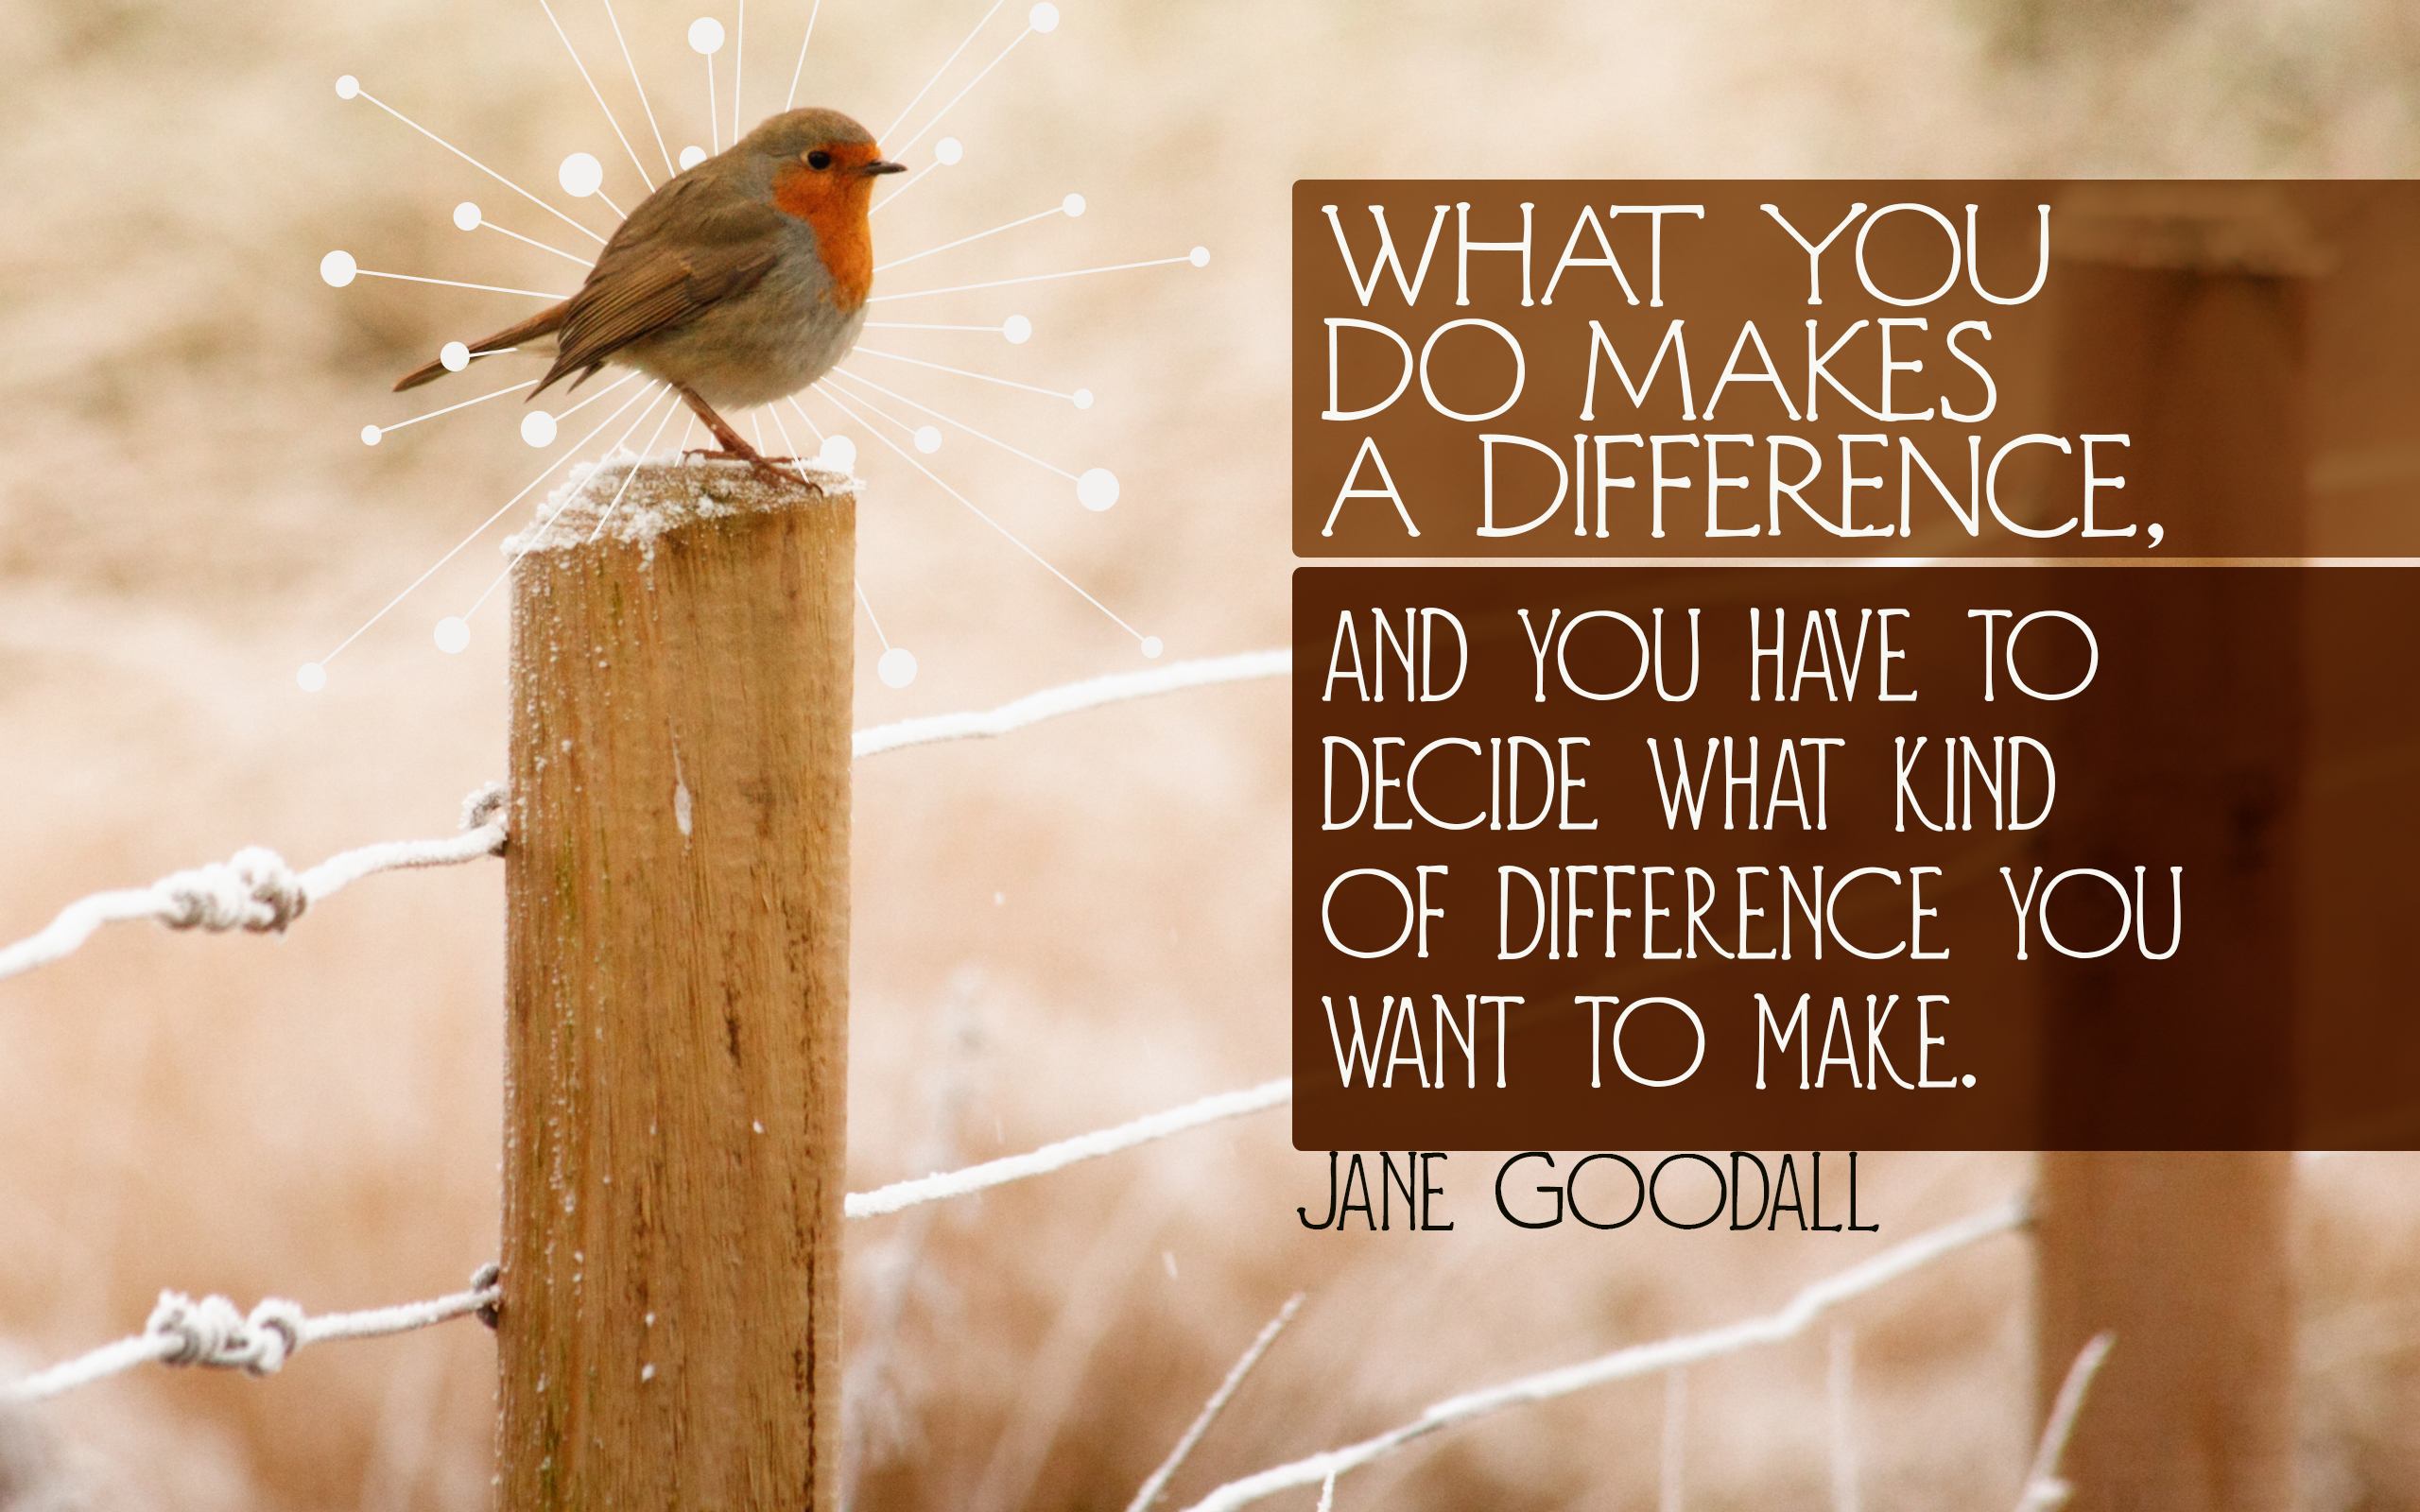 Difference You Want To Make by Jane Goodall Inspirational Graphic Quote